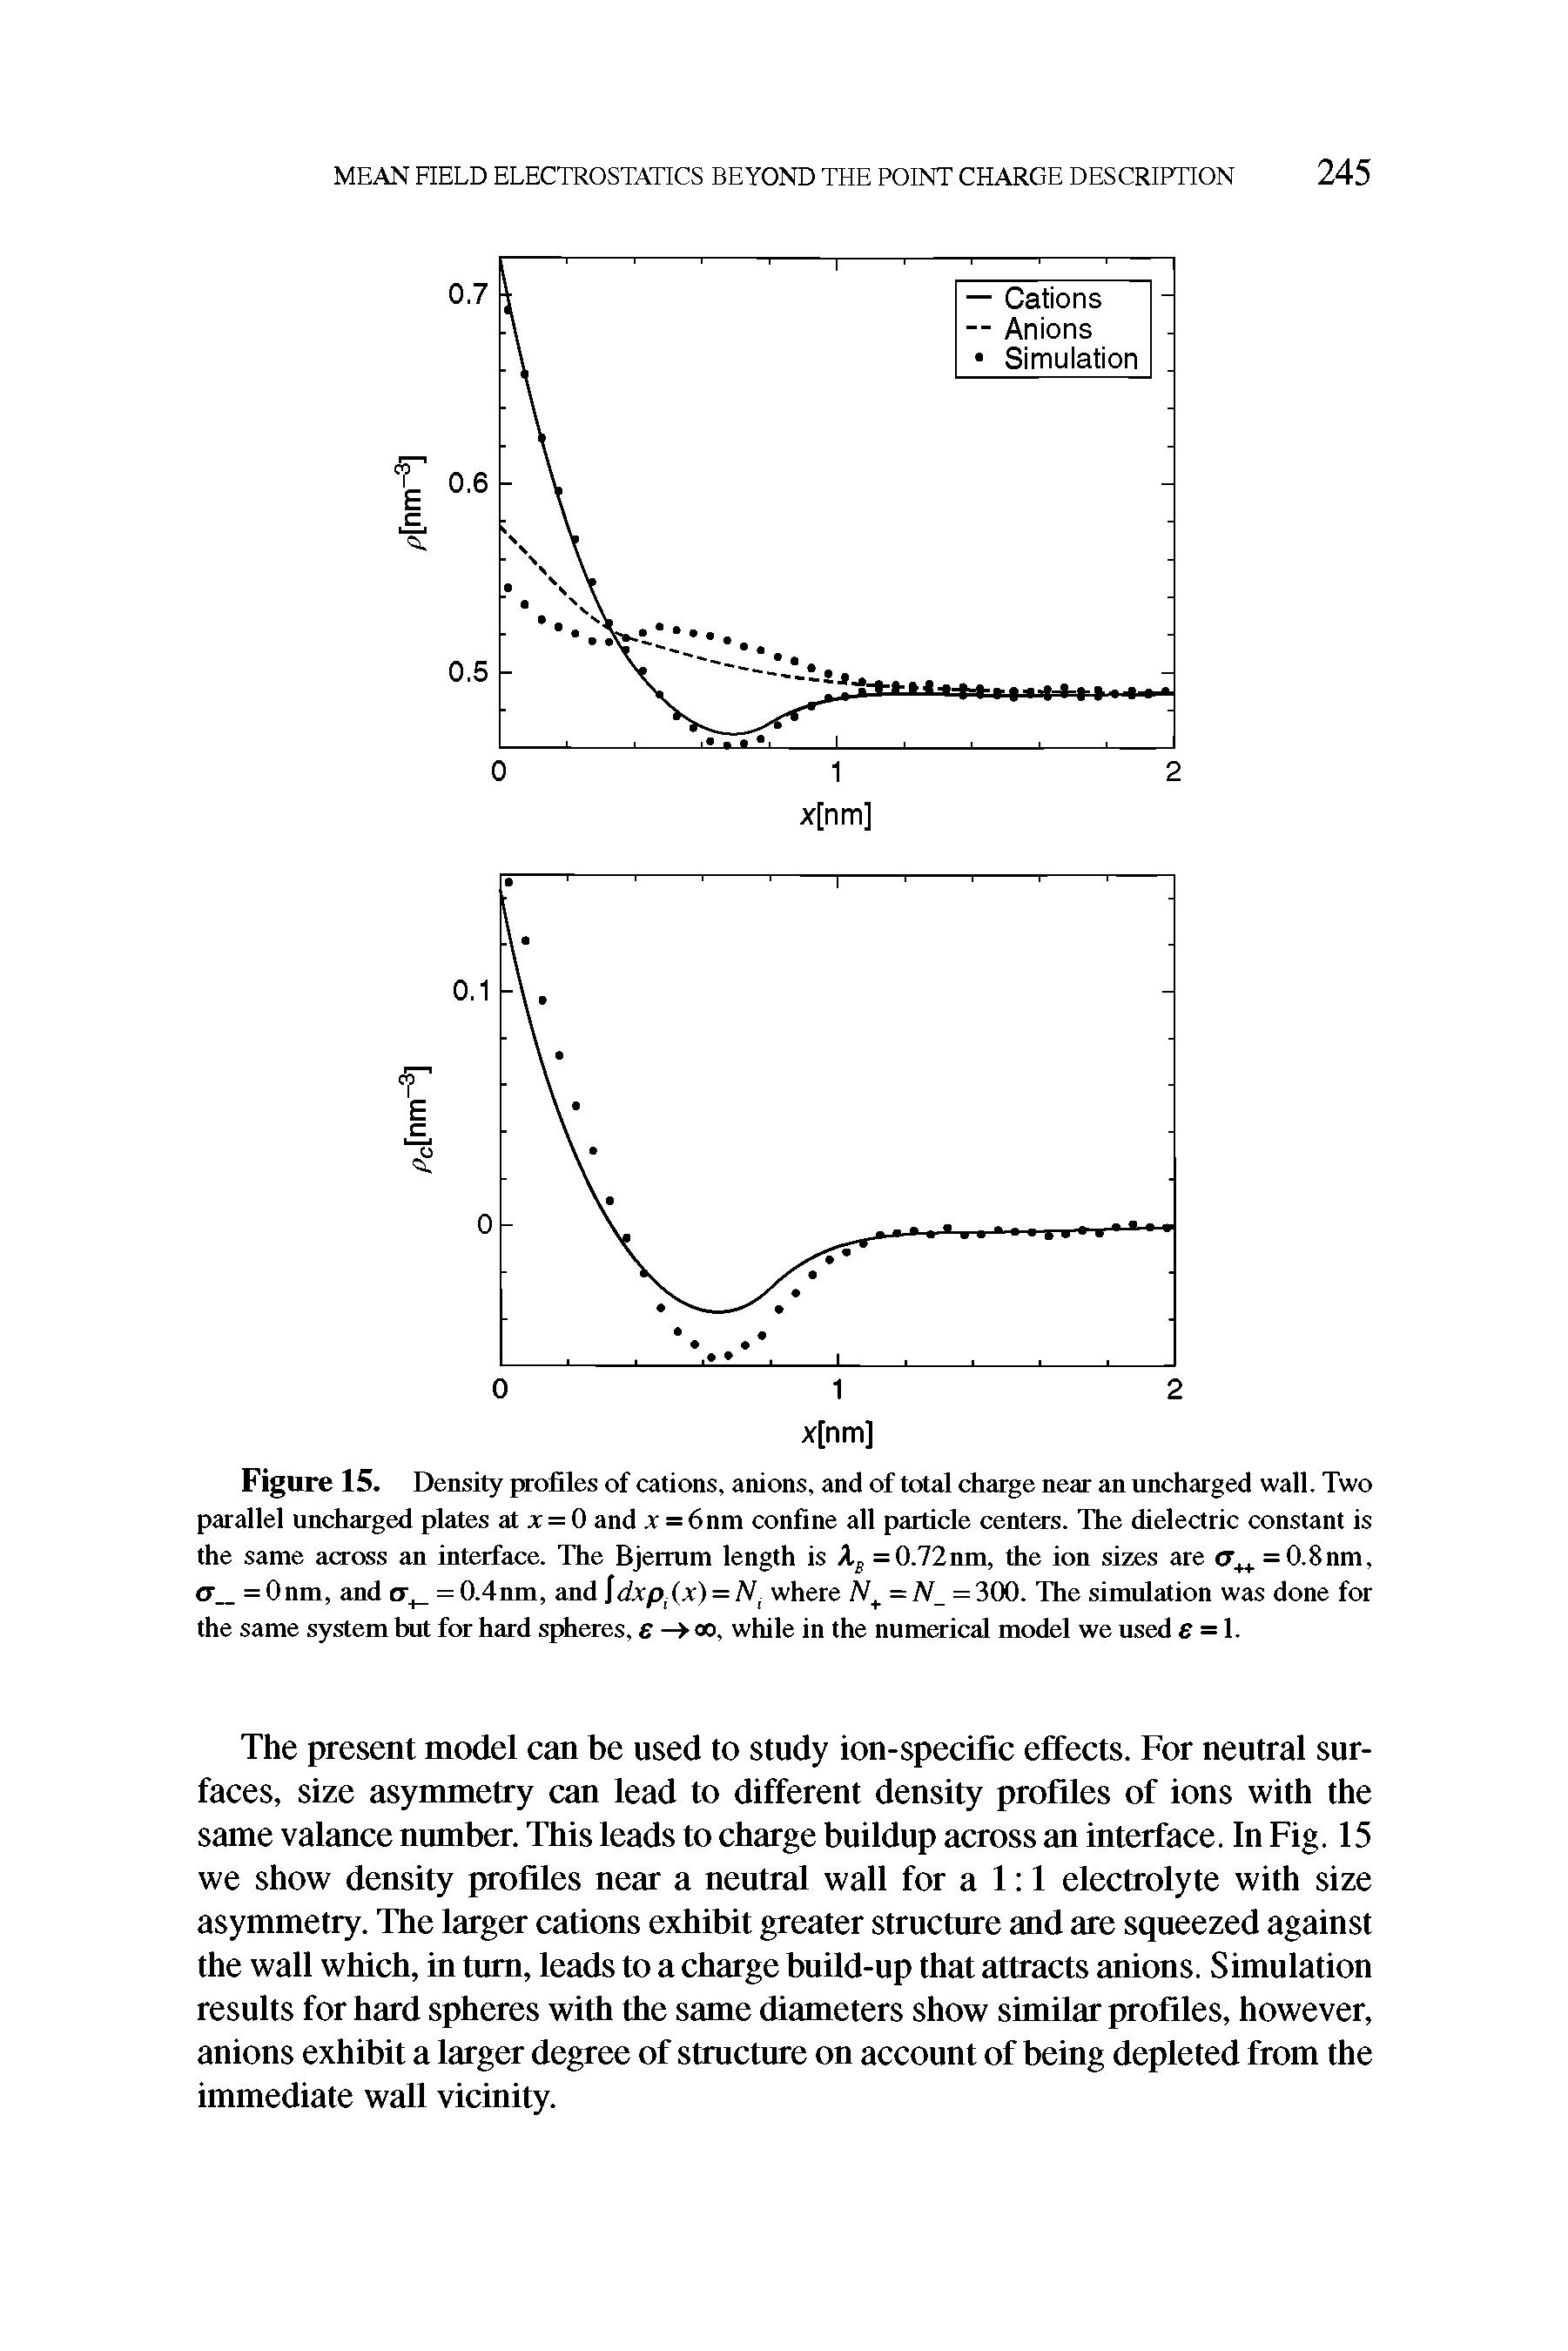 Figure 15. Density profiles of cations, anions, and of total charge near an uncharged wall. Two parallel uncharged plates at at = 0 and x = 6nm confine all particle centers. The dielectric constant is the same across an interface. The Bjerrum length is Aj =0.72nm, the ion sizes are cr = 0.8nm, <T =0nm, and = 0.4nm, and ldxp (x) = N where N =N =30O. The simulation was done for the same system but for hard spheres, e -> oo, while in the numerical model we used e = 1.